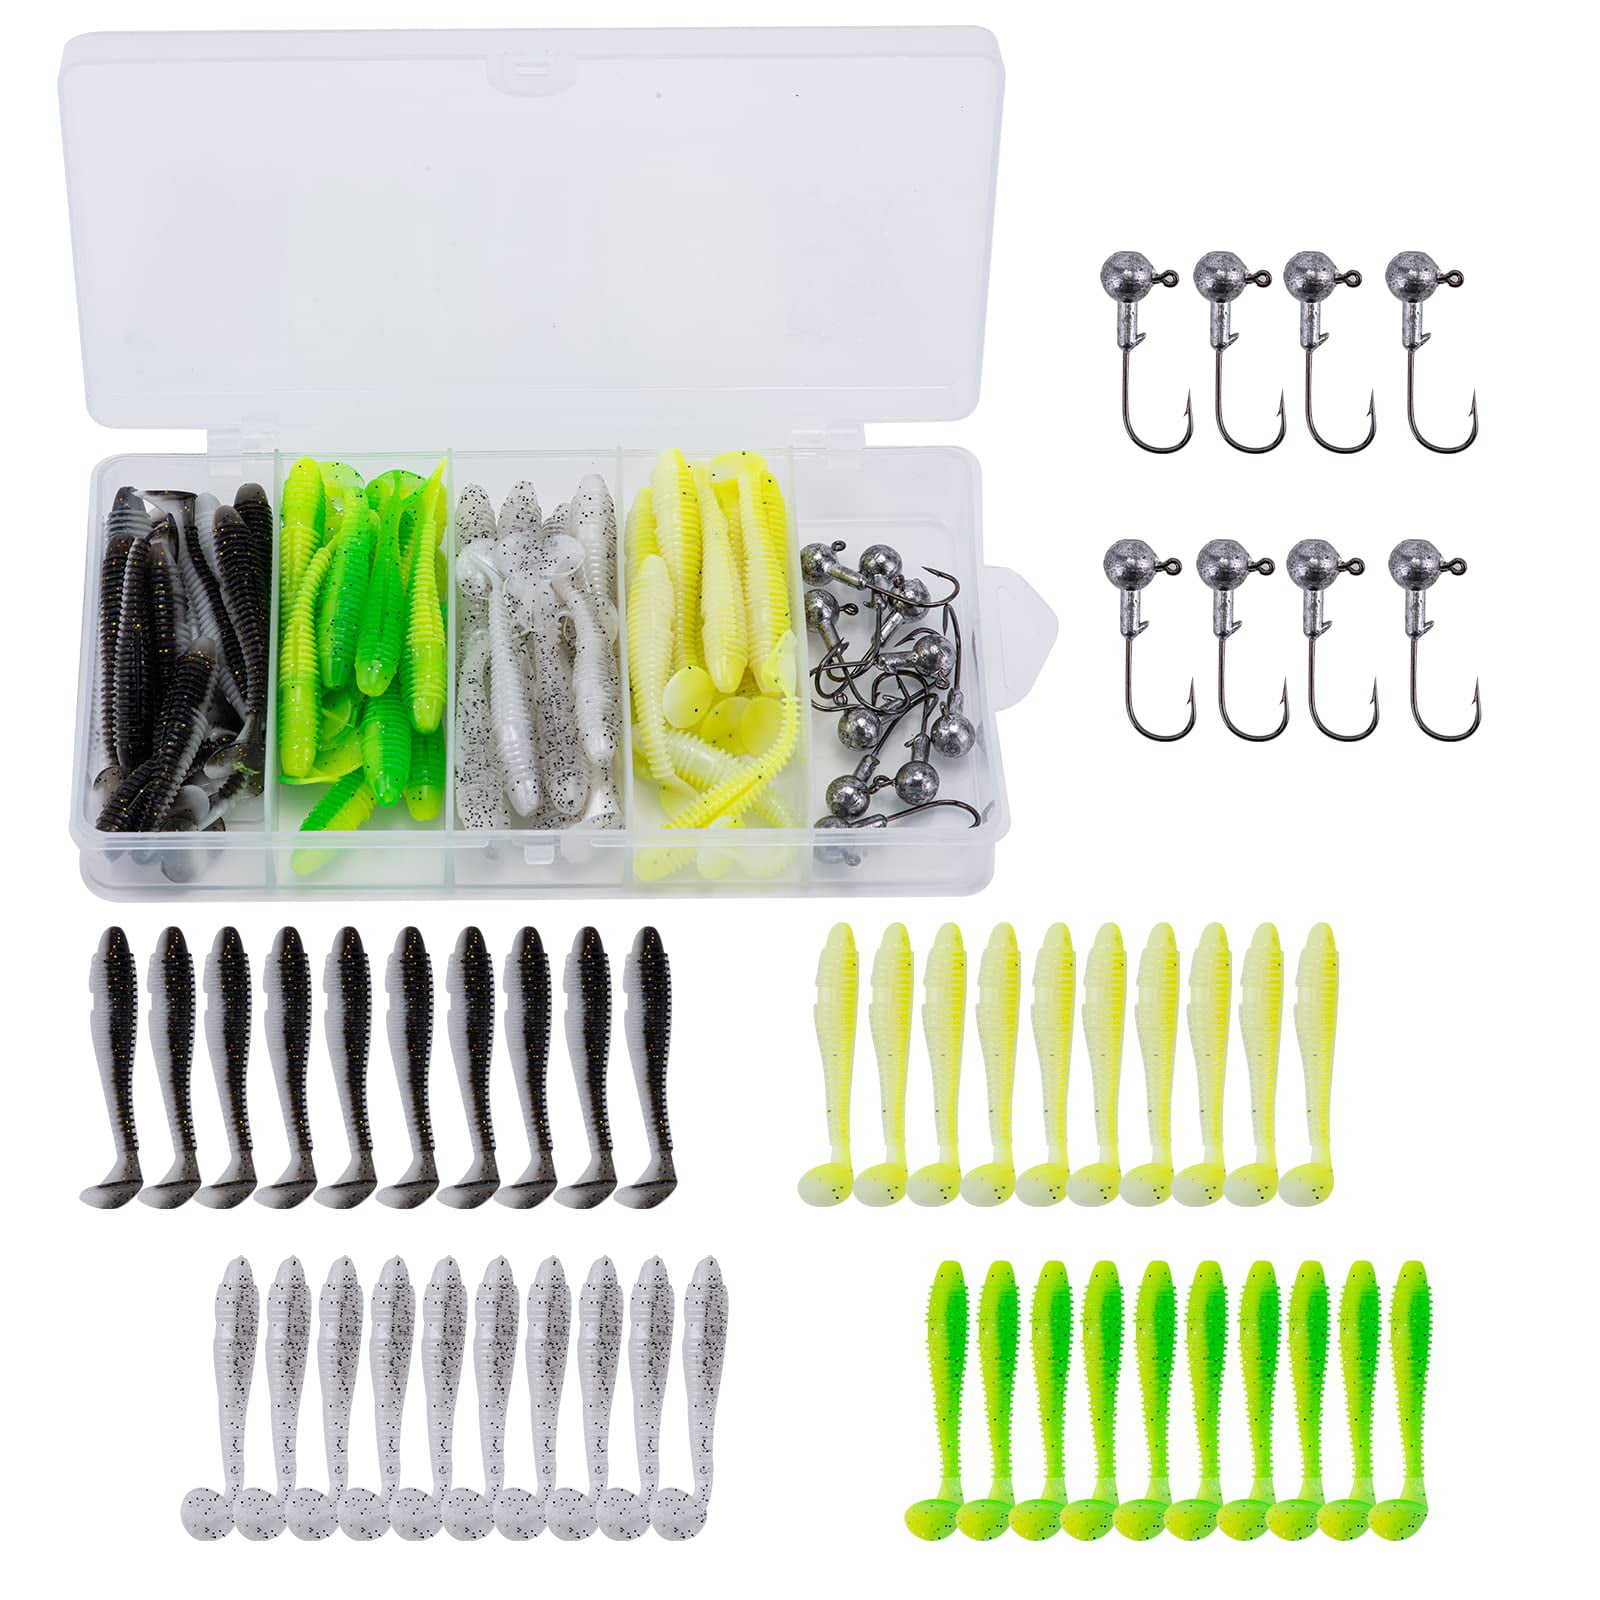 Goture Fishing Soft Plastic Lures Kit Jig Head Hooks Crappie Lures Trout  Bass Fishing Worm Lures Crappie Jigs Fishing Lures Set with Tackl Box for  Freshwater Saltwater Fishing 